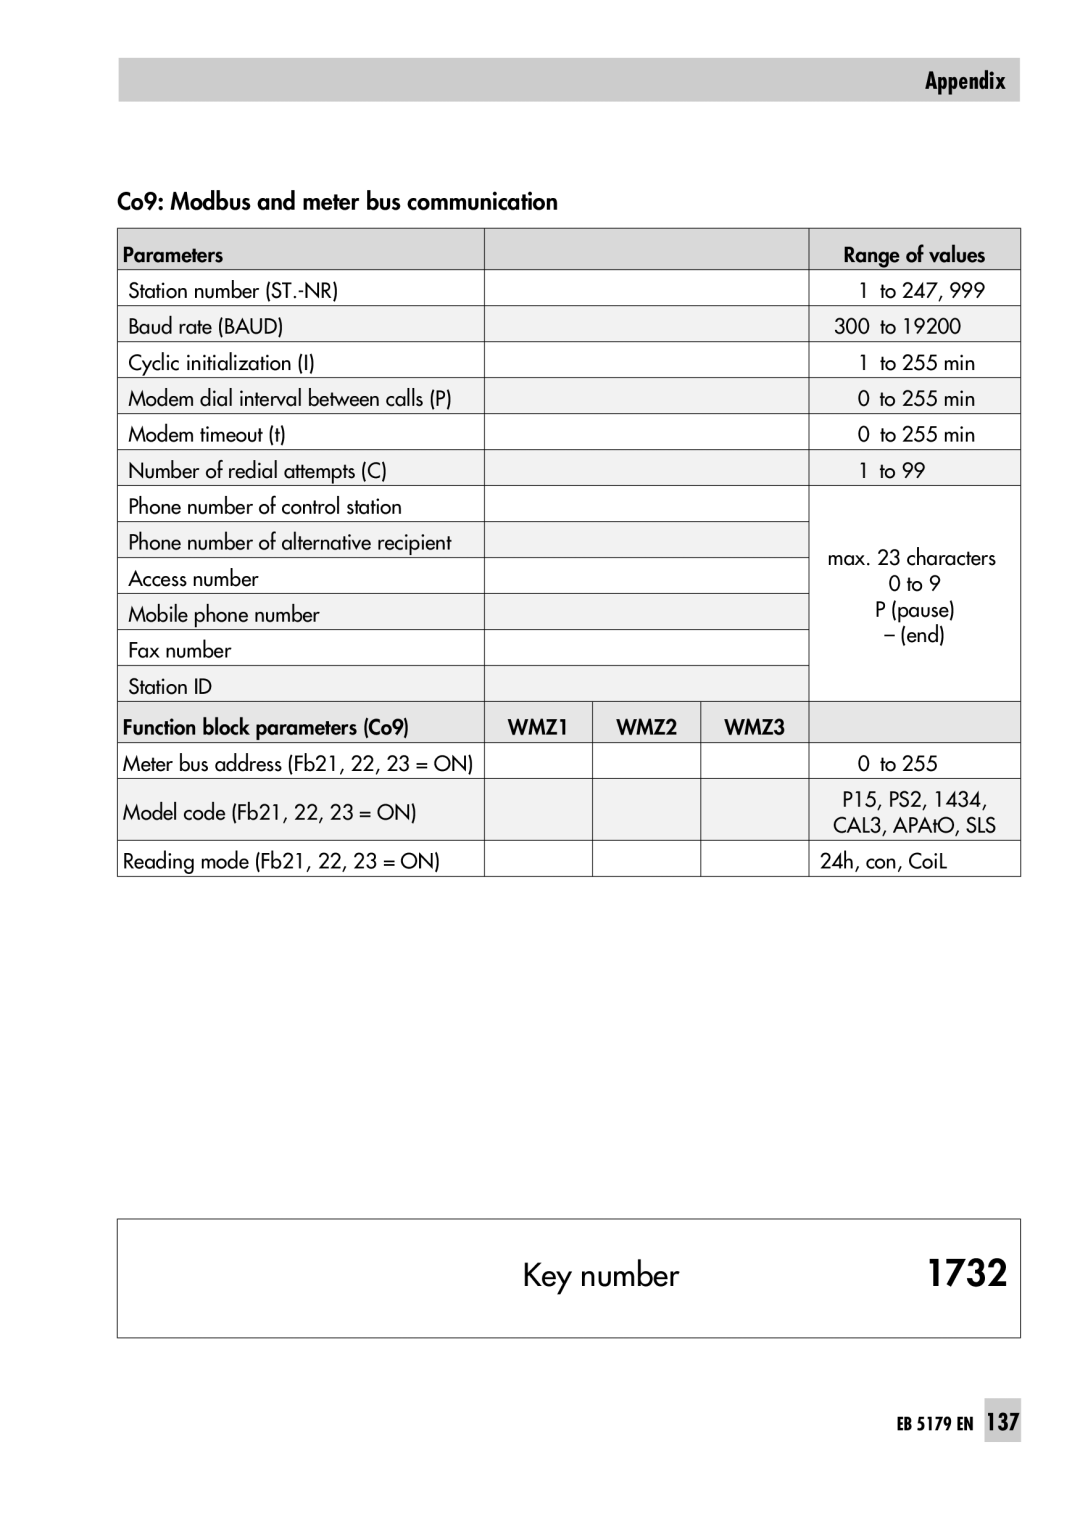 Samson 5179, 5100 operating instructions 1732, Key number, Co9: Modbus and meter bus communication 